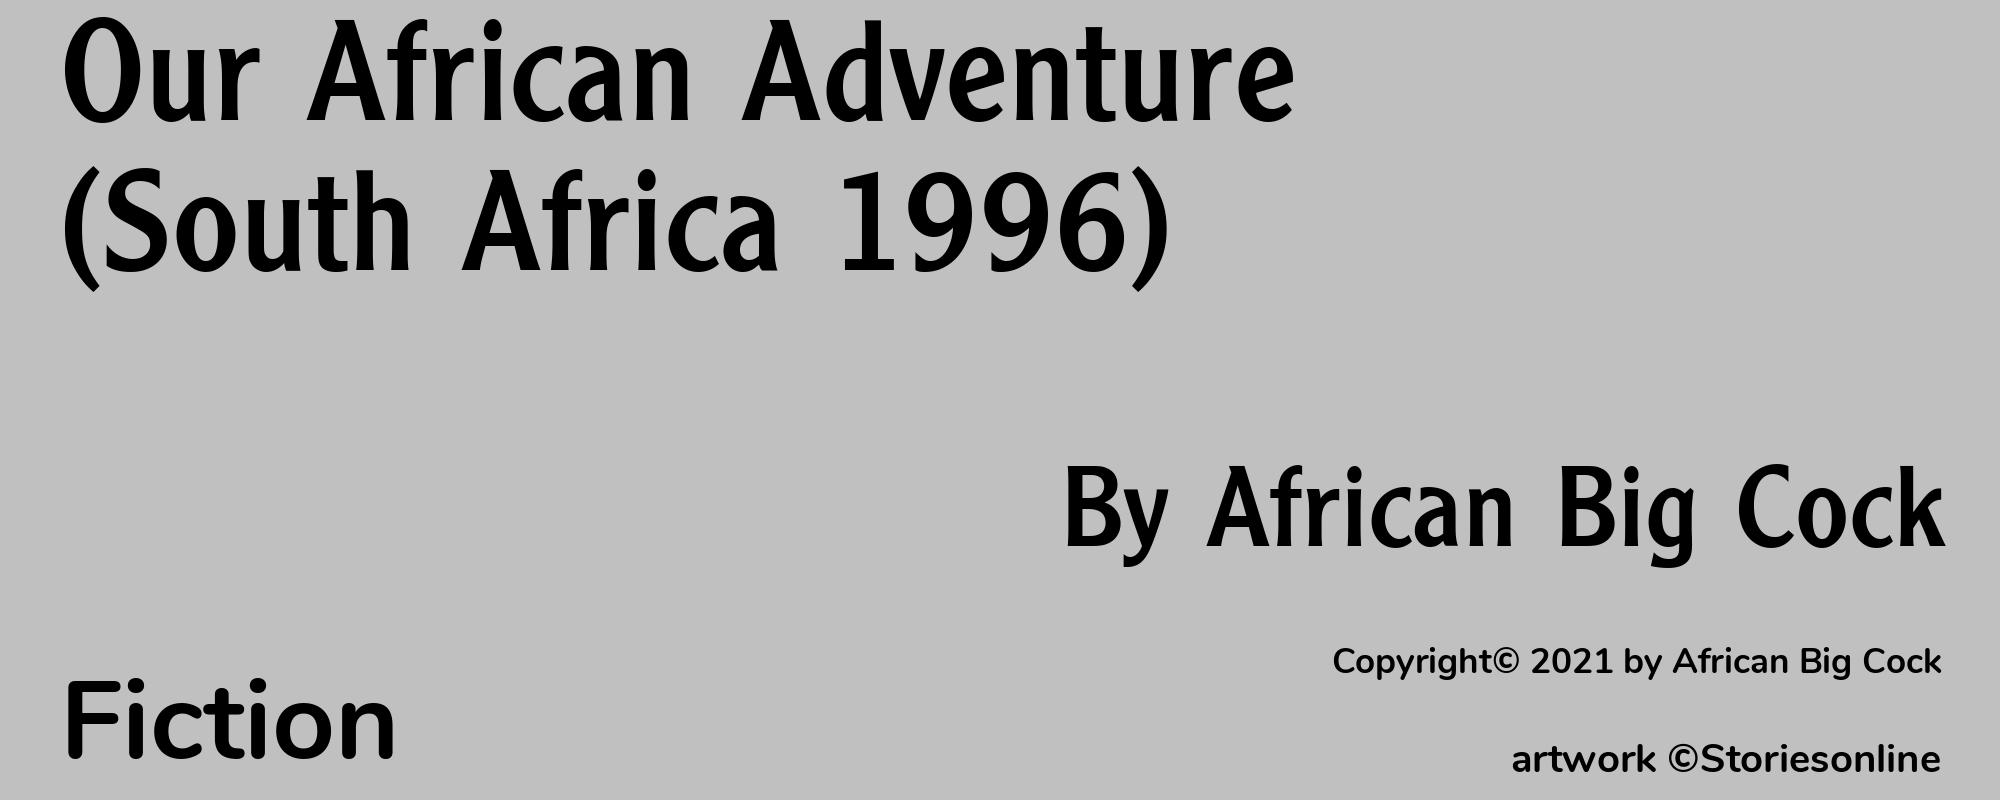 Our African Adventure (South Africa 1996) - Cover